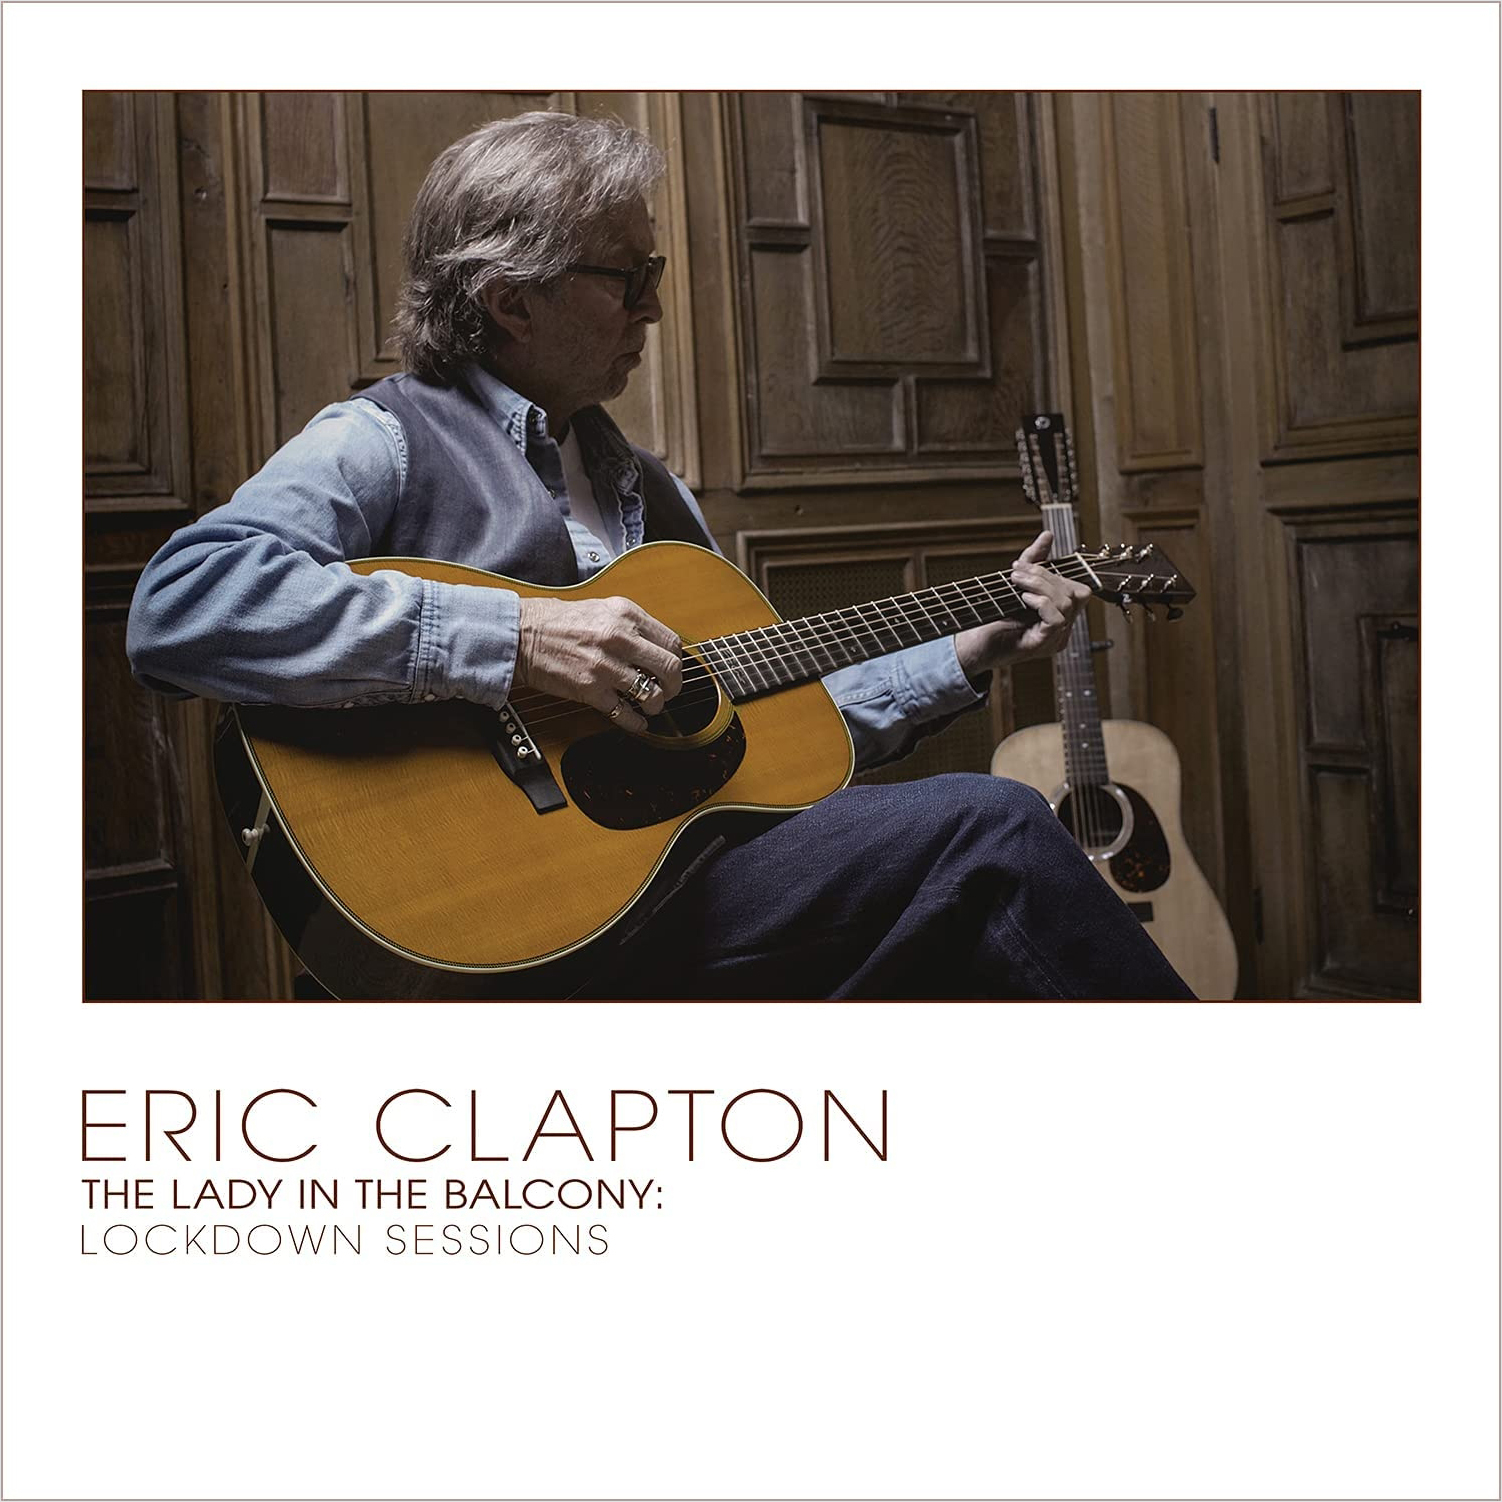 Eric Clapton – The Lady In The Balcony. Lockdown Sessions (2 LP)